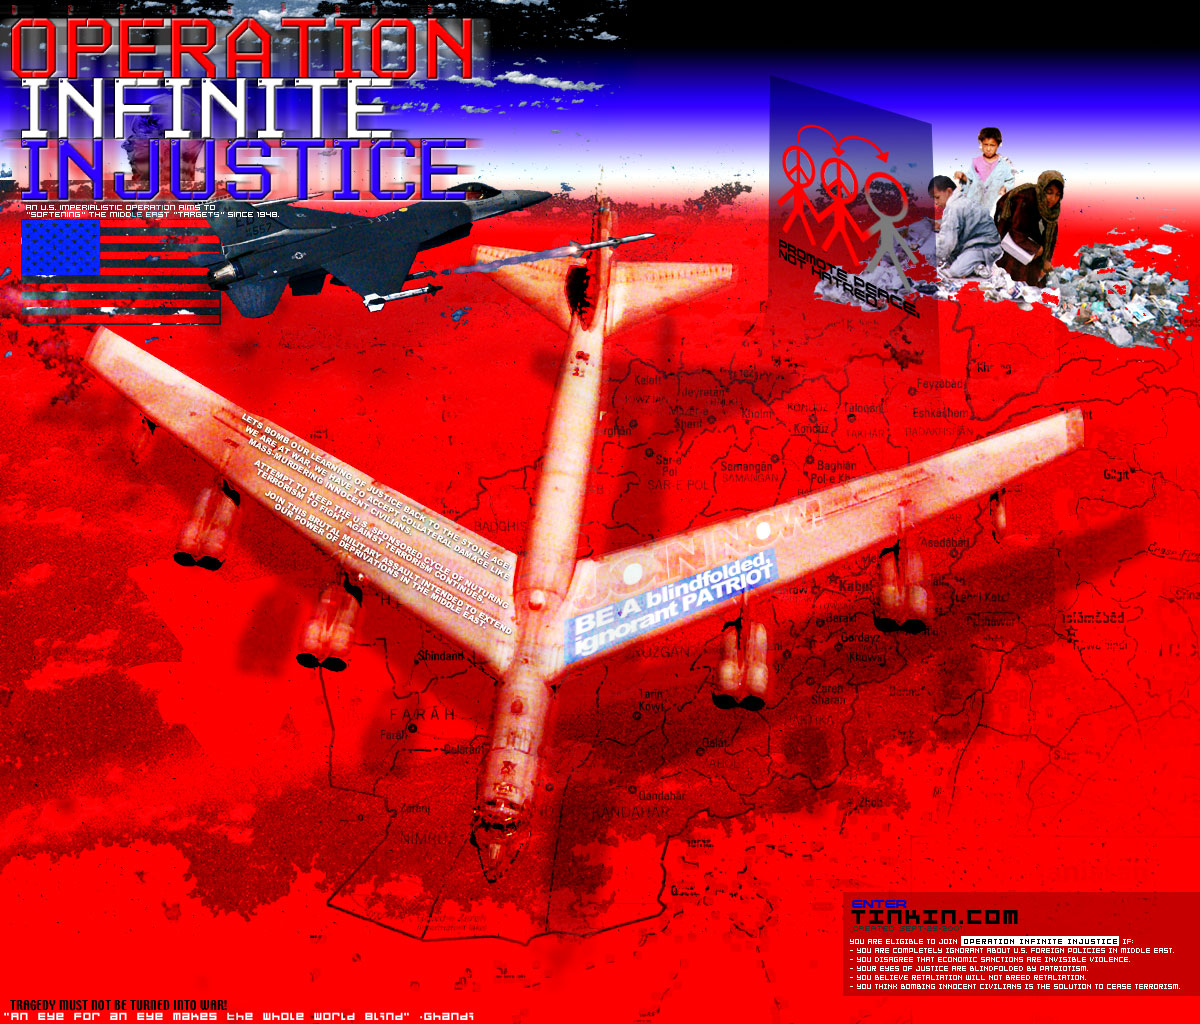 loading....... "OPERATION INFINITE INJUSTICE" (389K) please be patient......... GOD BLESS AMERICA AND AFGHANISTAN.